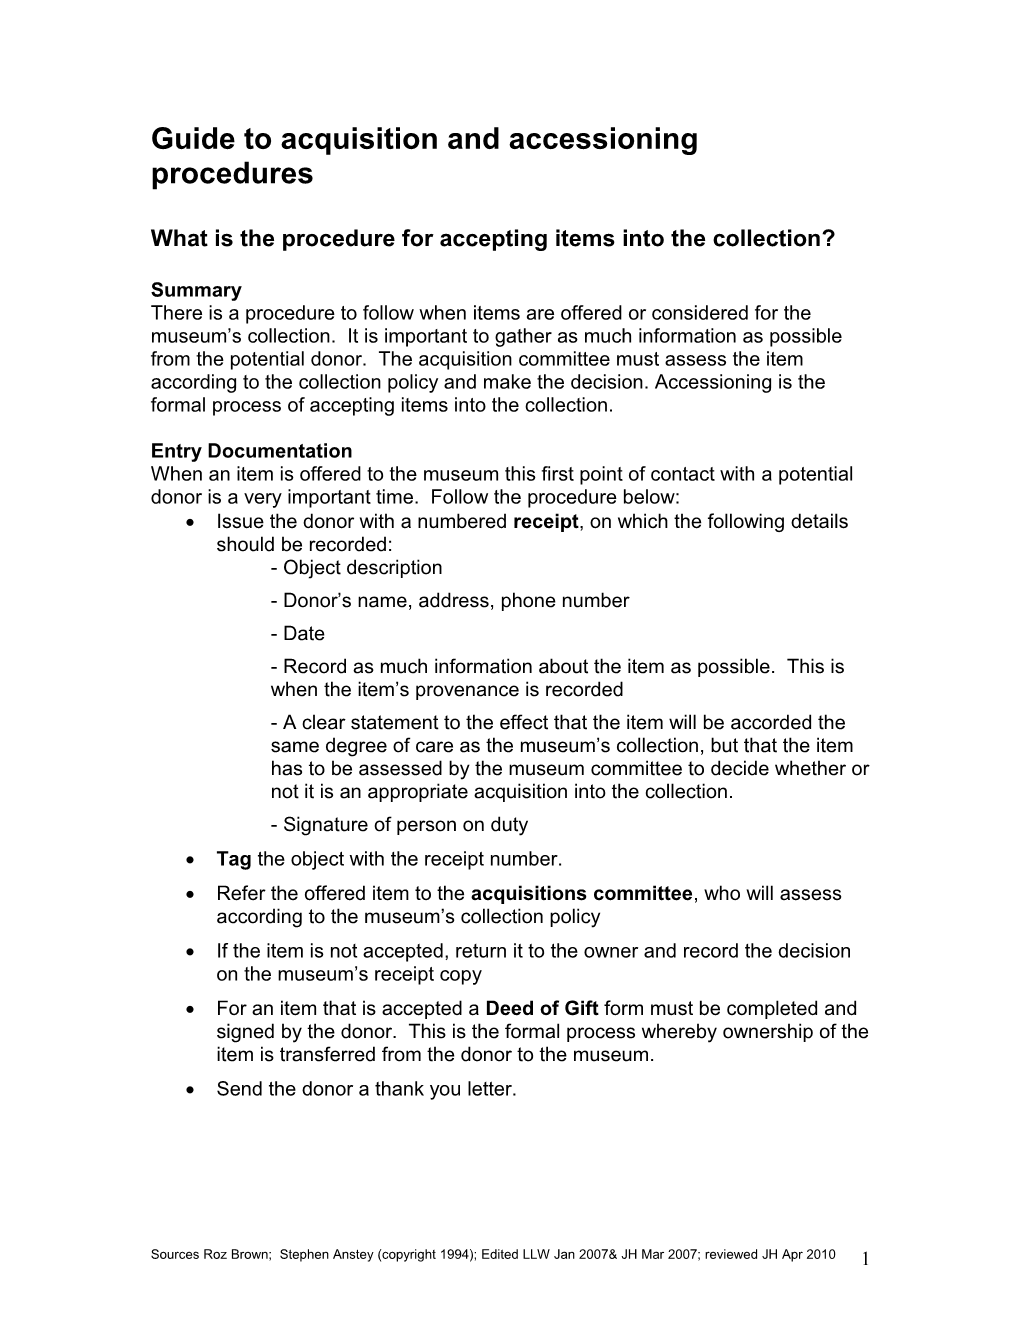 Guide to Acquisition and Accessioning Procedures